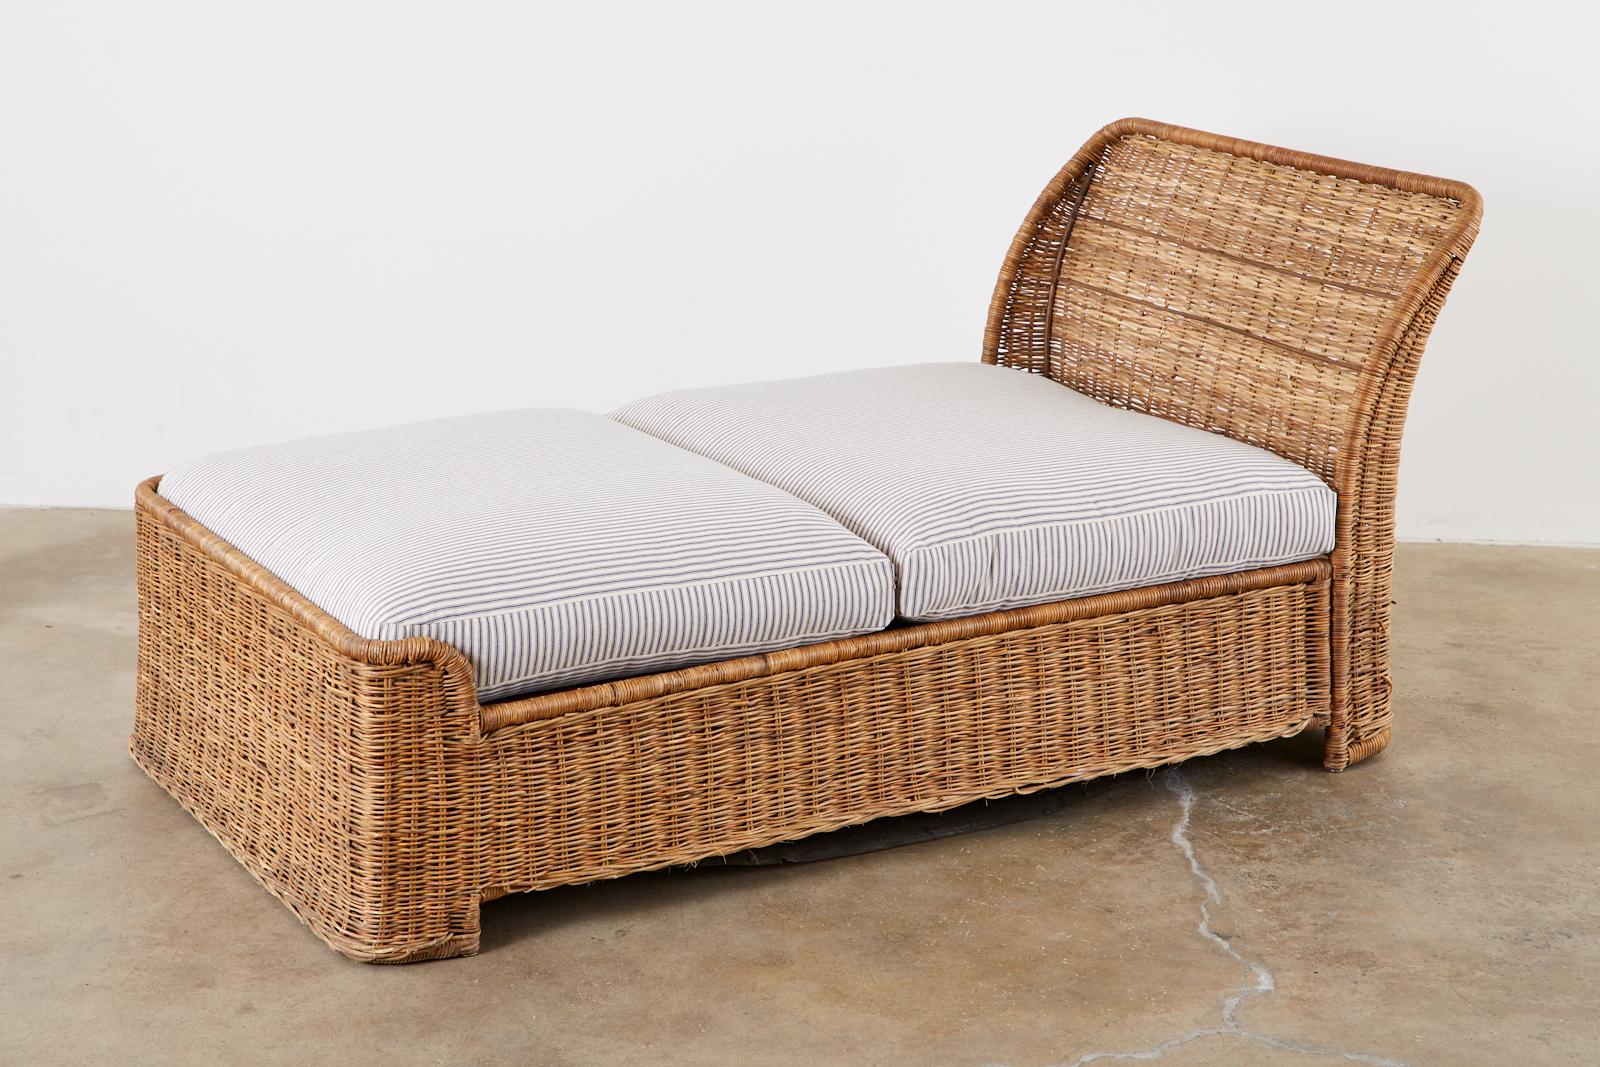 20th Century Organic Modern Style Wicker Daybed or Chaise Lounge